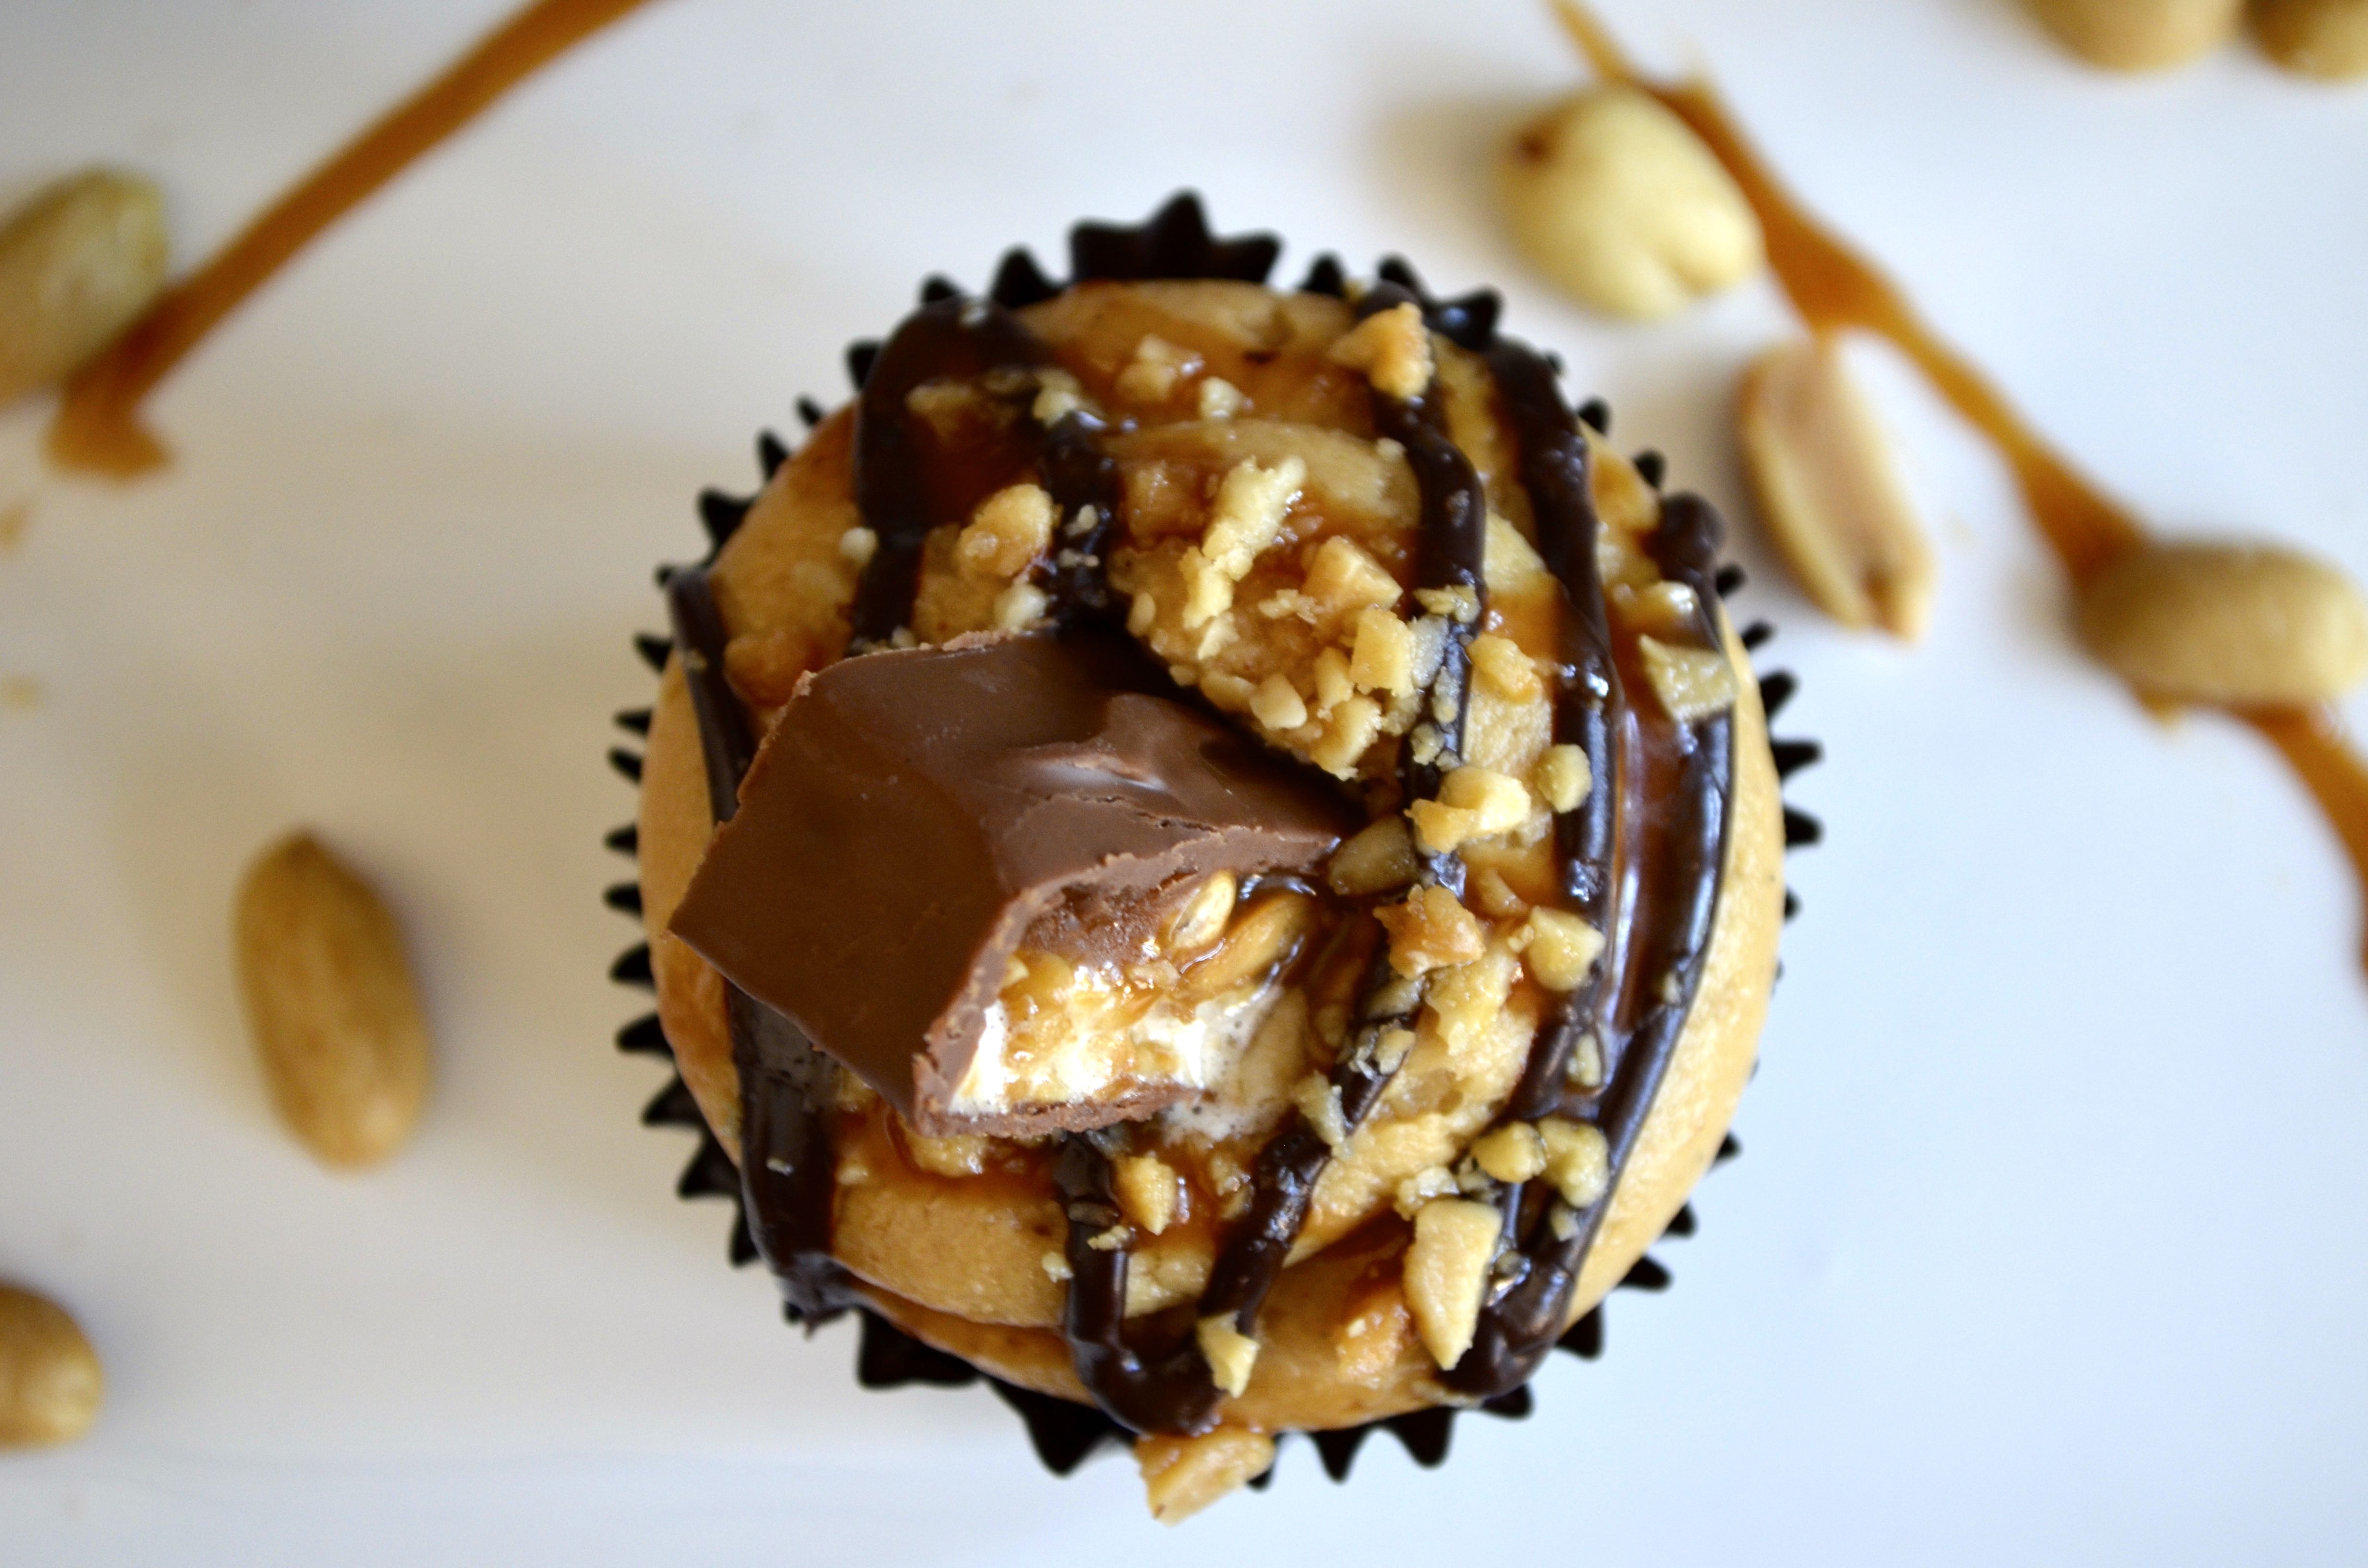 Snickers cupcakes at www.laughlovekiss.com